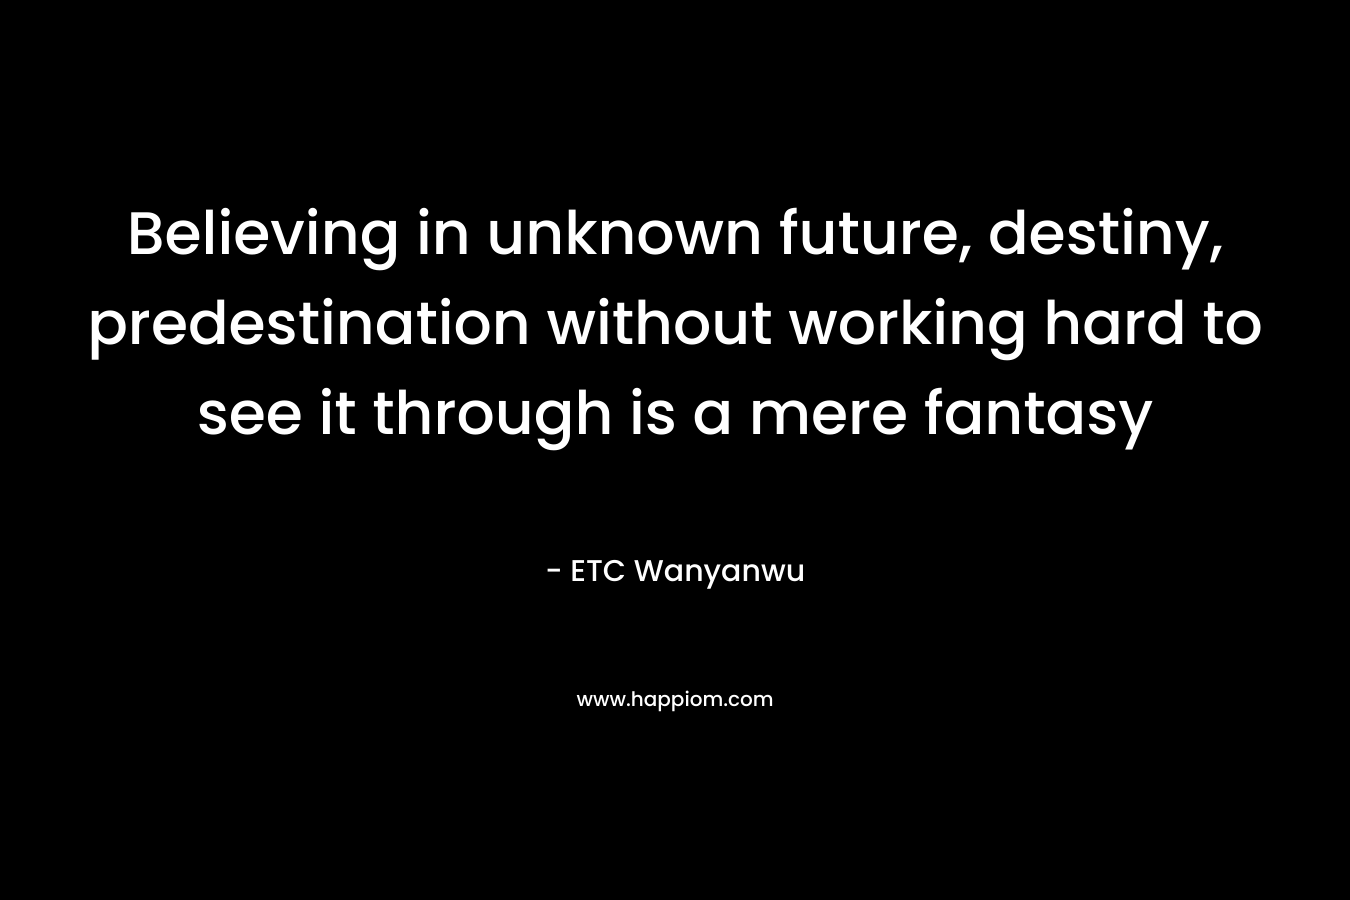 Believing in unknown future, destiny, predestination without working hard to see it through is a mere fantasy